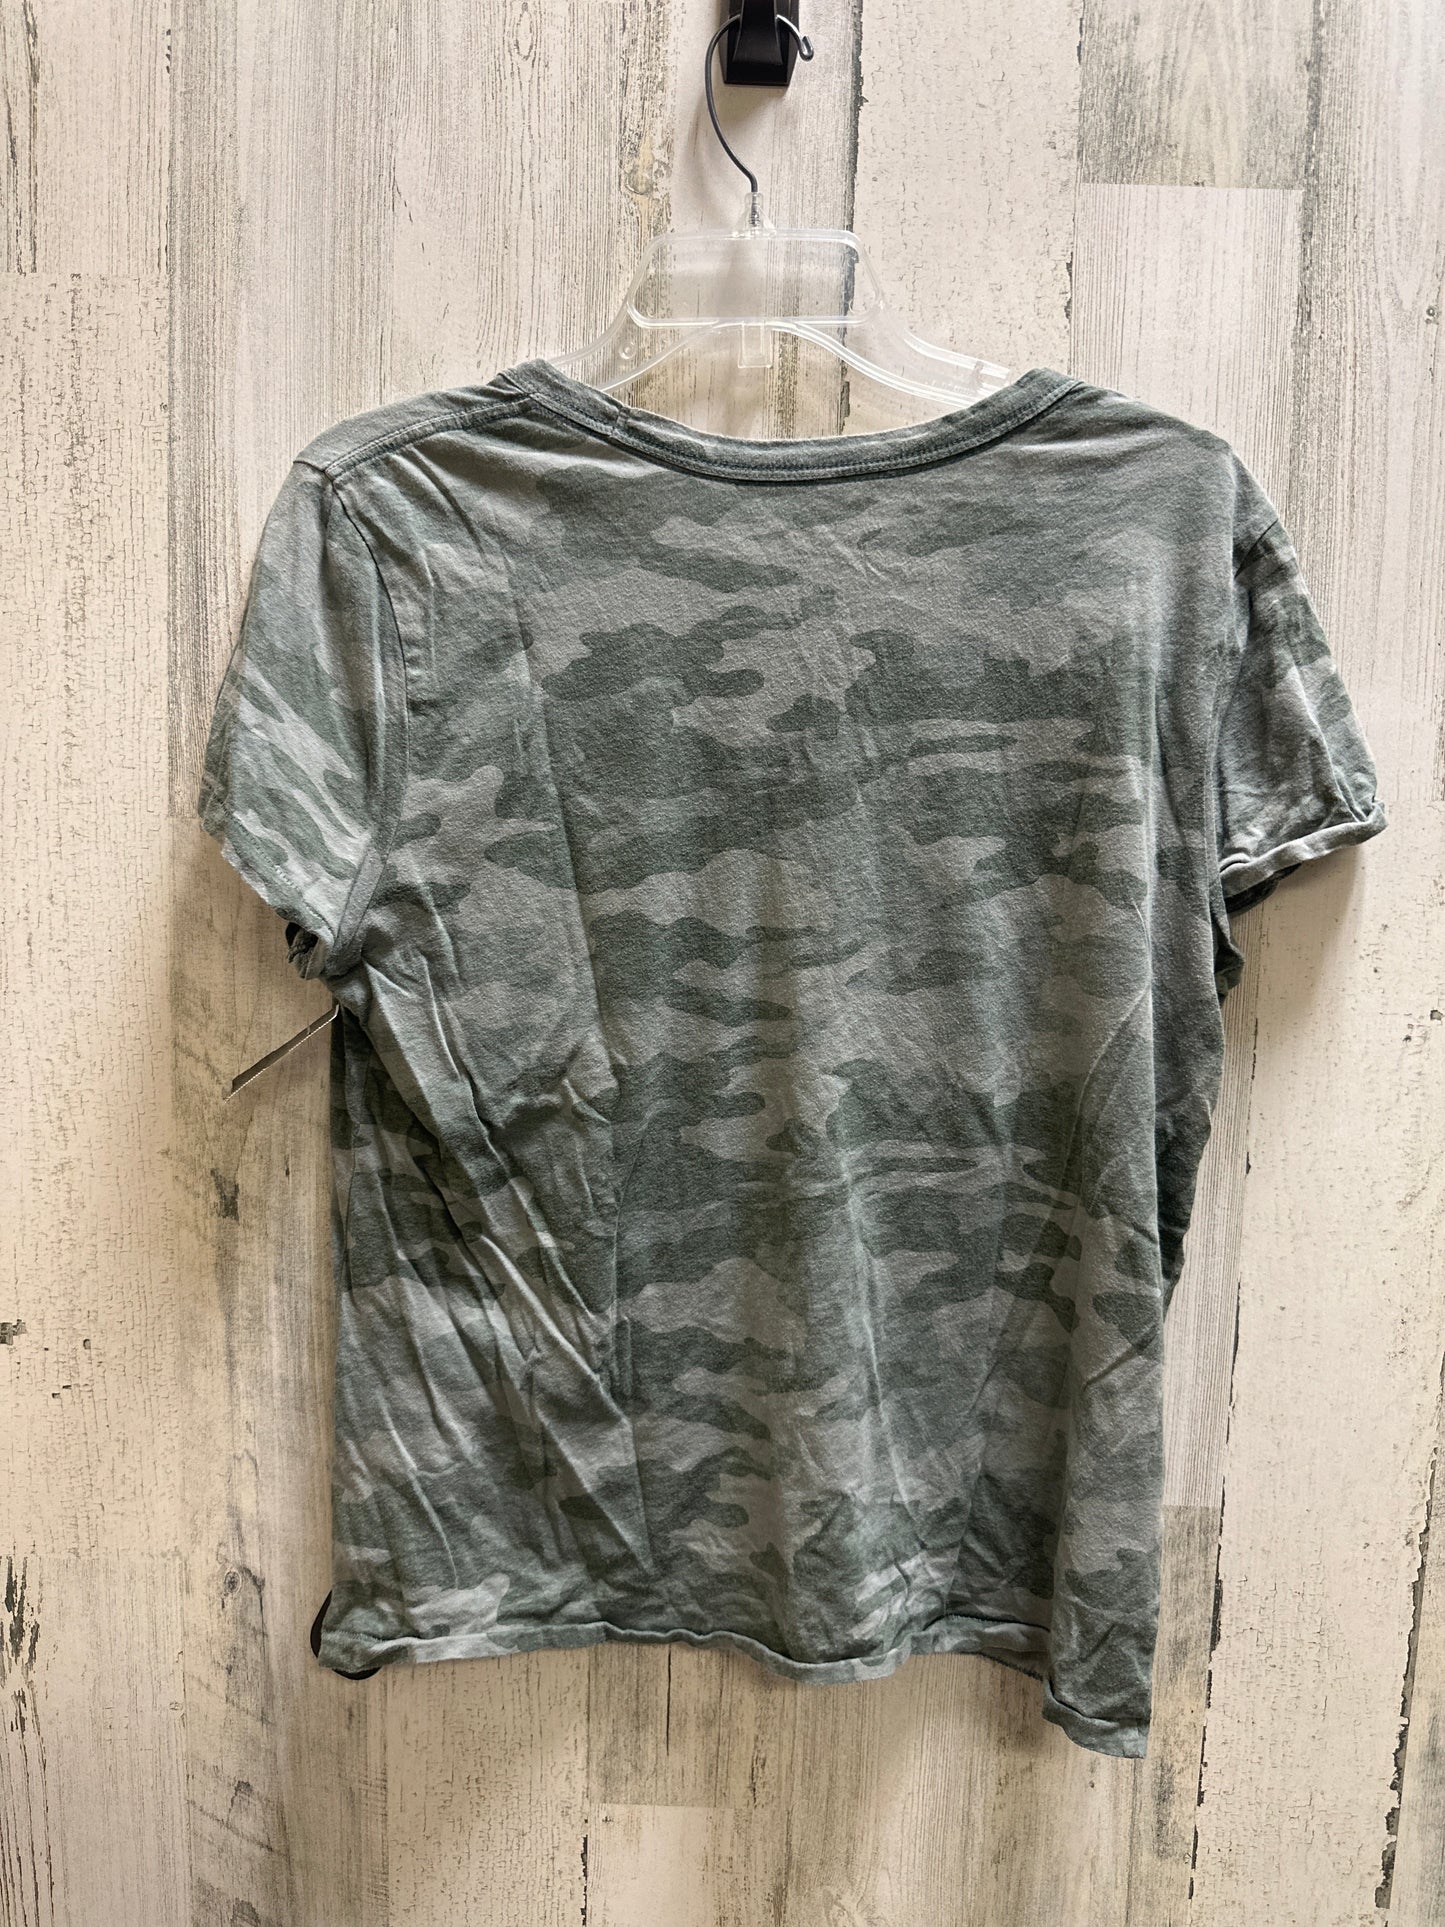 Camouflage Print Top Short Sleeve Universal Thread, Size L